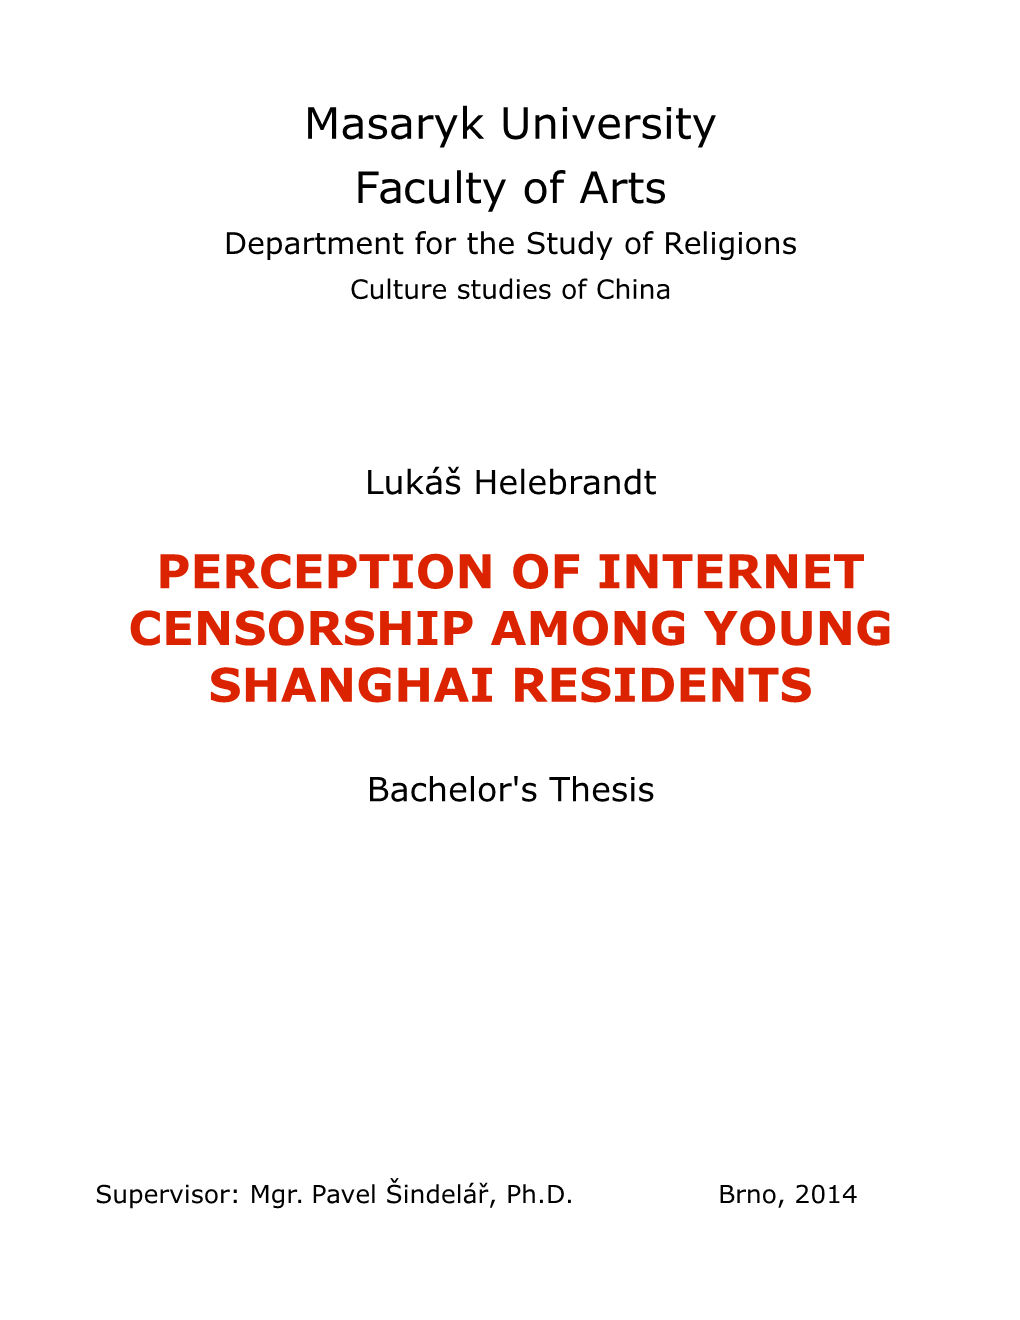 Perception of Internet Censorship Among Young Shanghai Residents